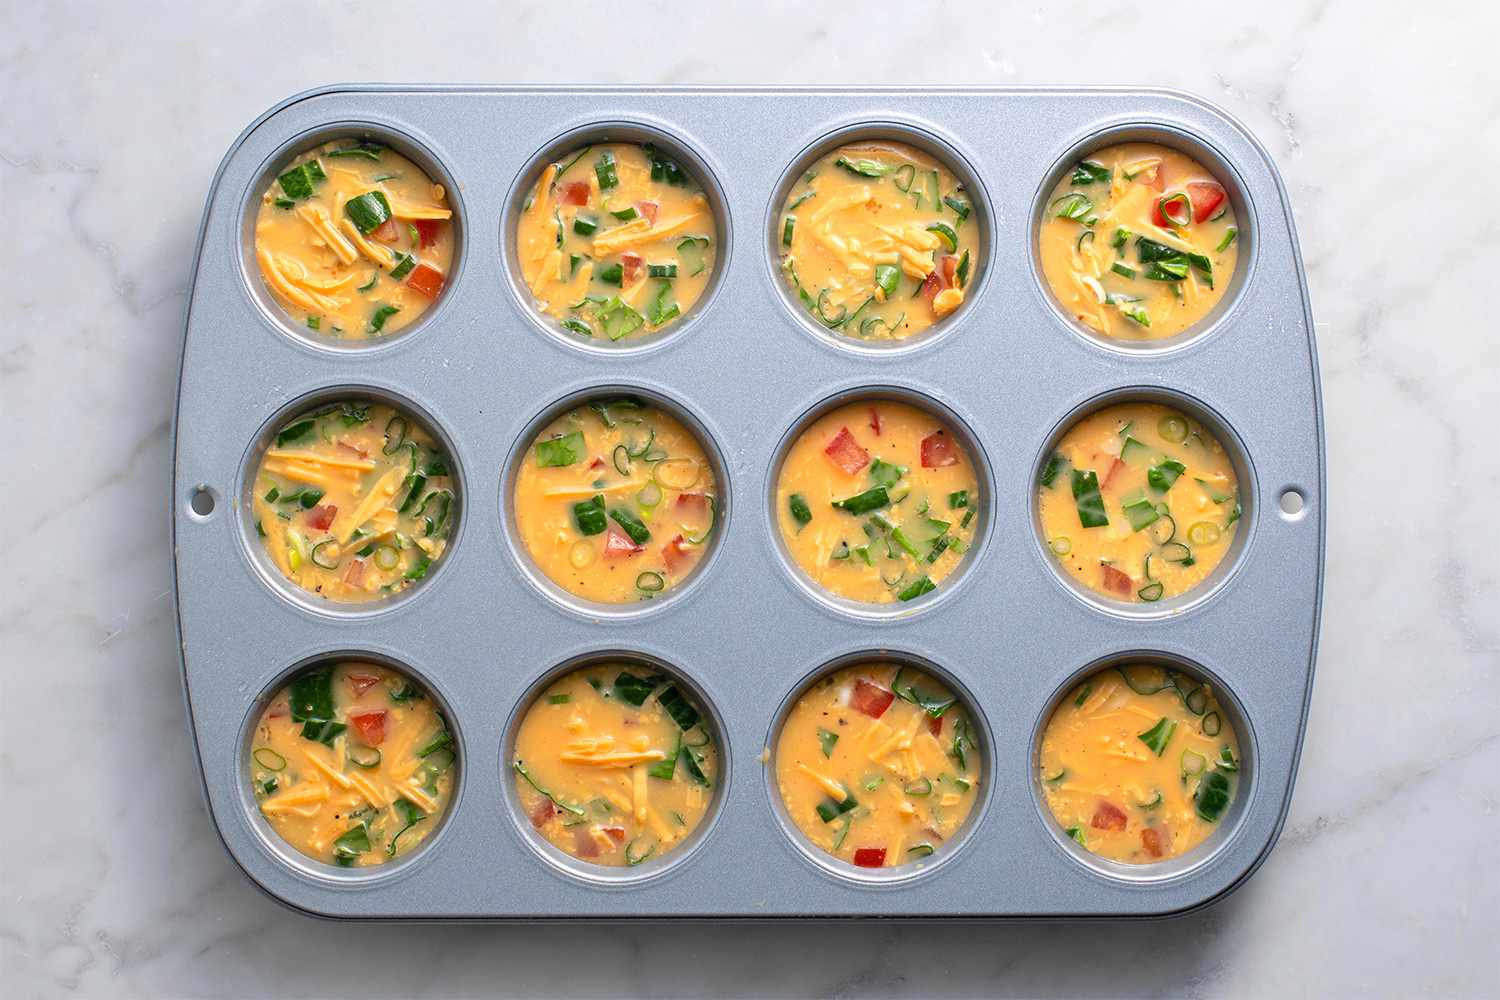 Egg and vegetable mixture poured into greased muffin tins 